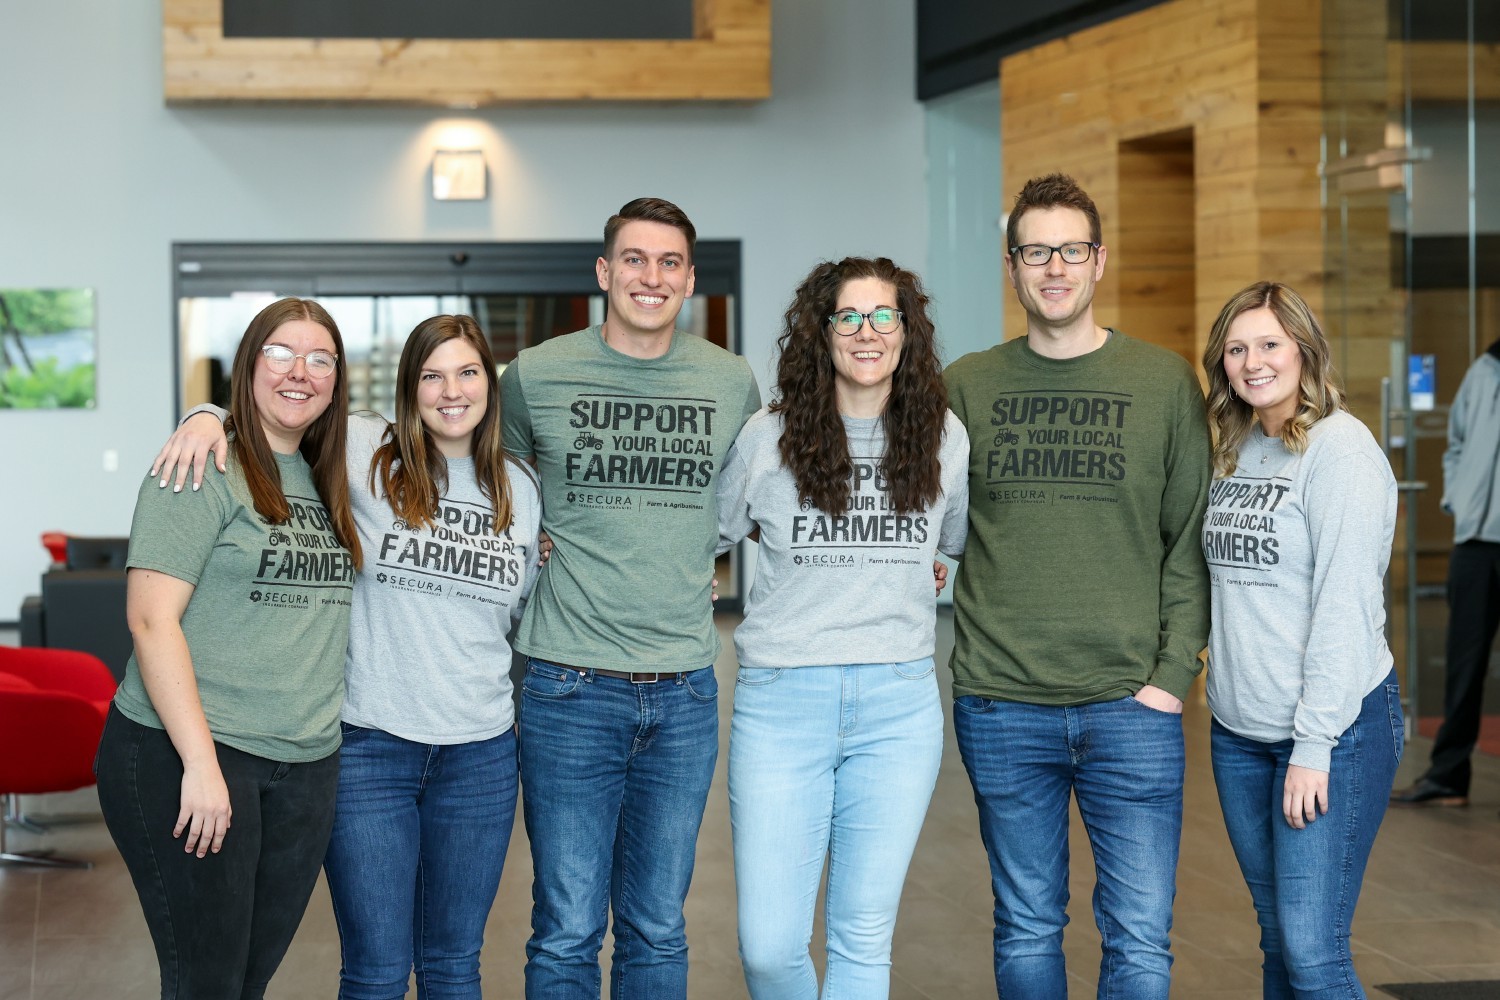 Farm Lines underwriters gather for a photo to show off their shirts supporting local farmers.